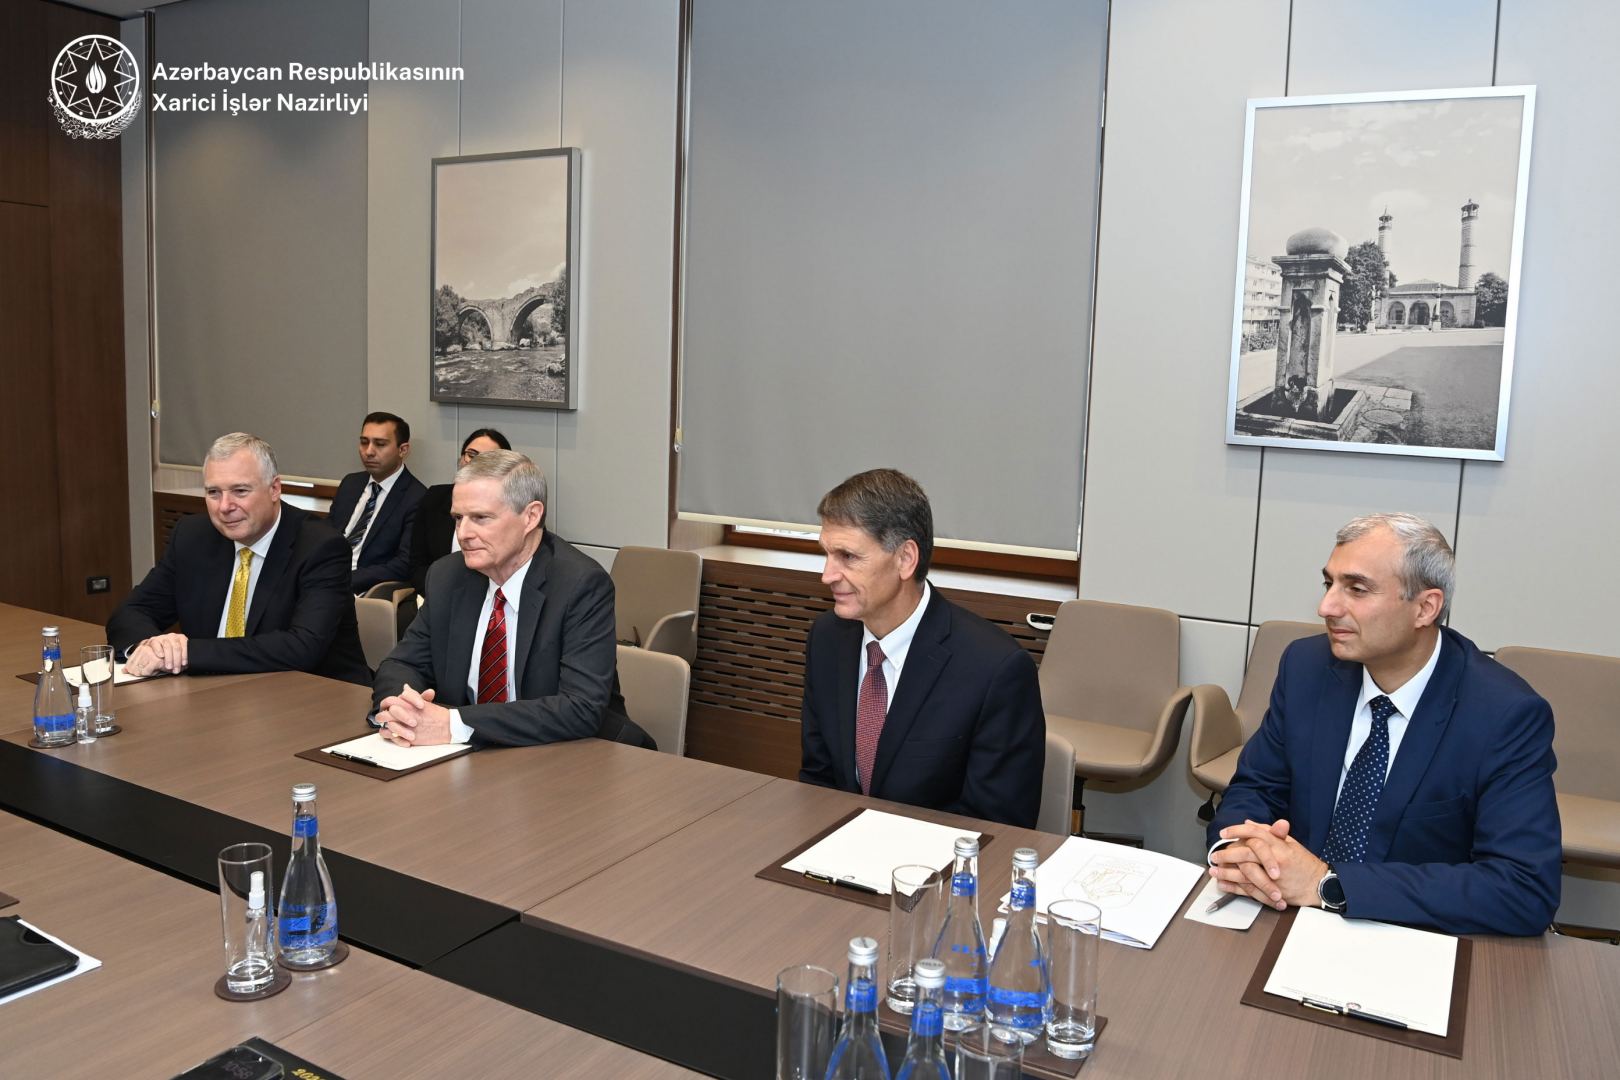 Azerbaijani society’s multicultural values hold great importance - LDS Church (PHOTO)